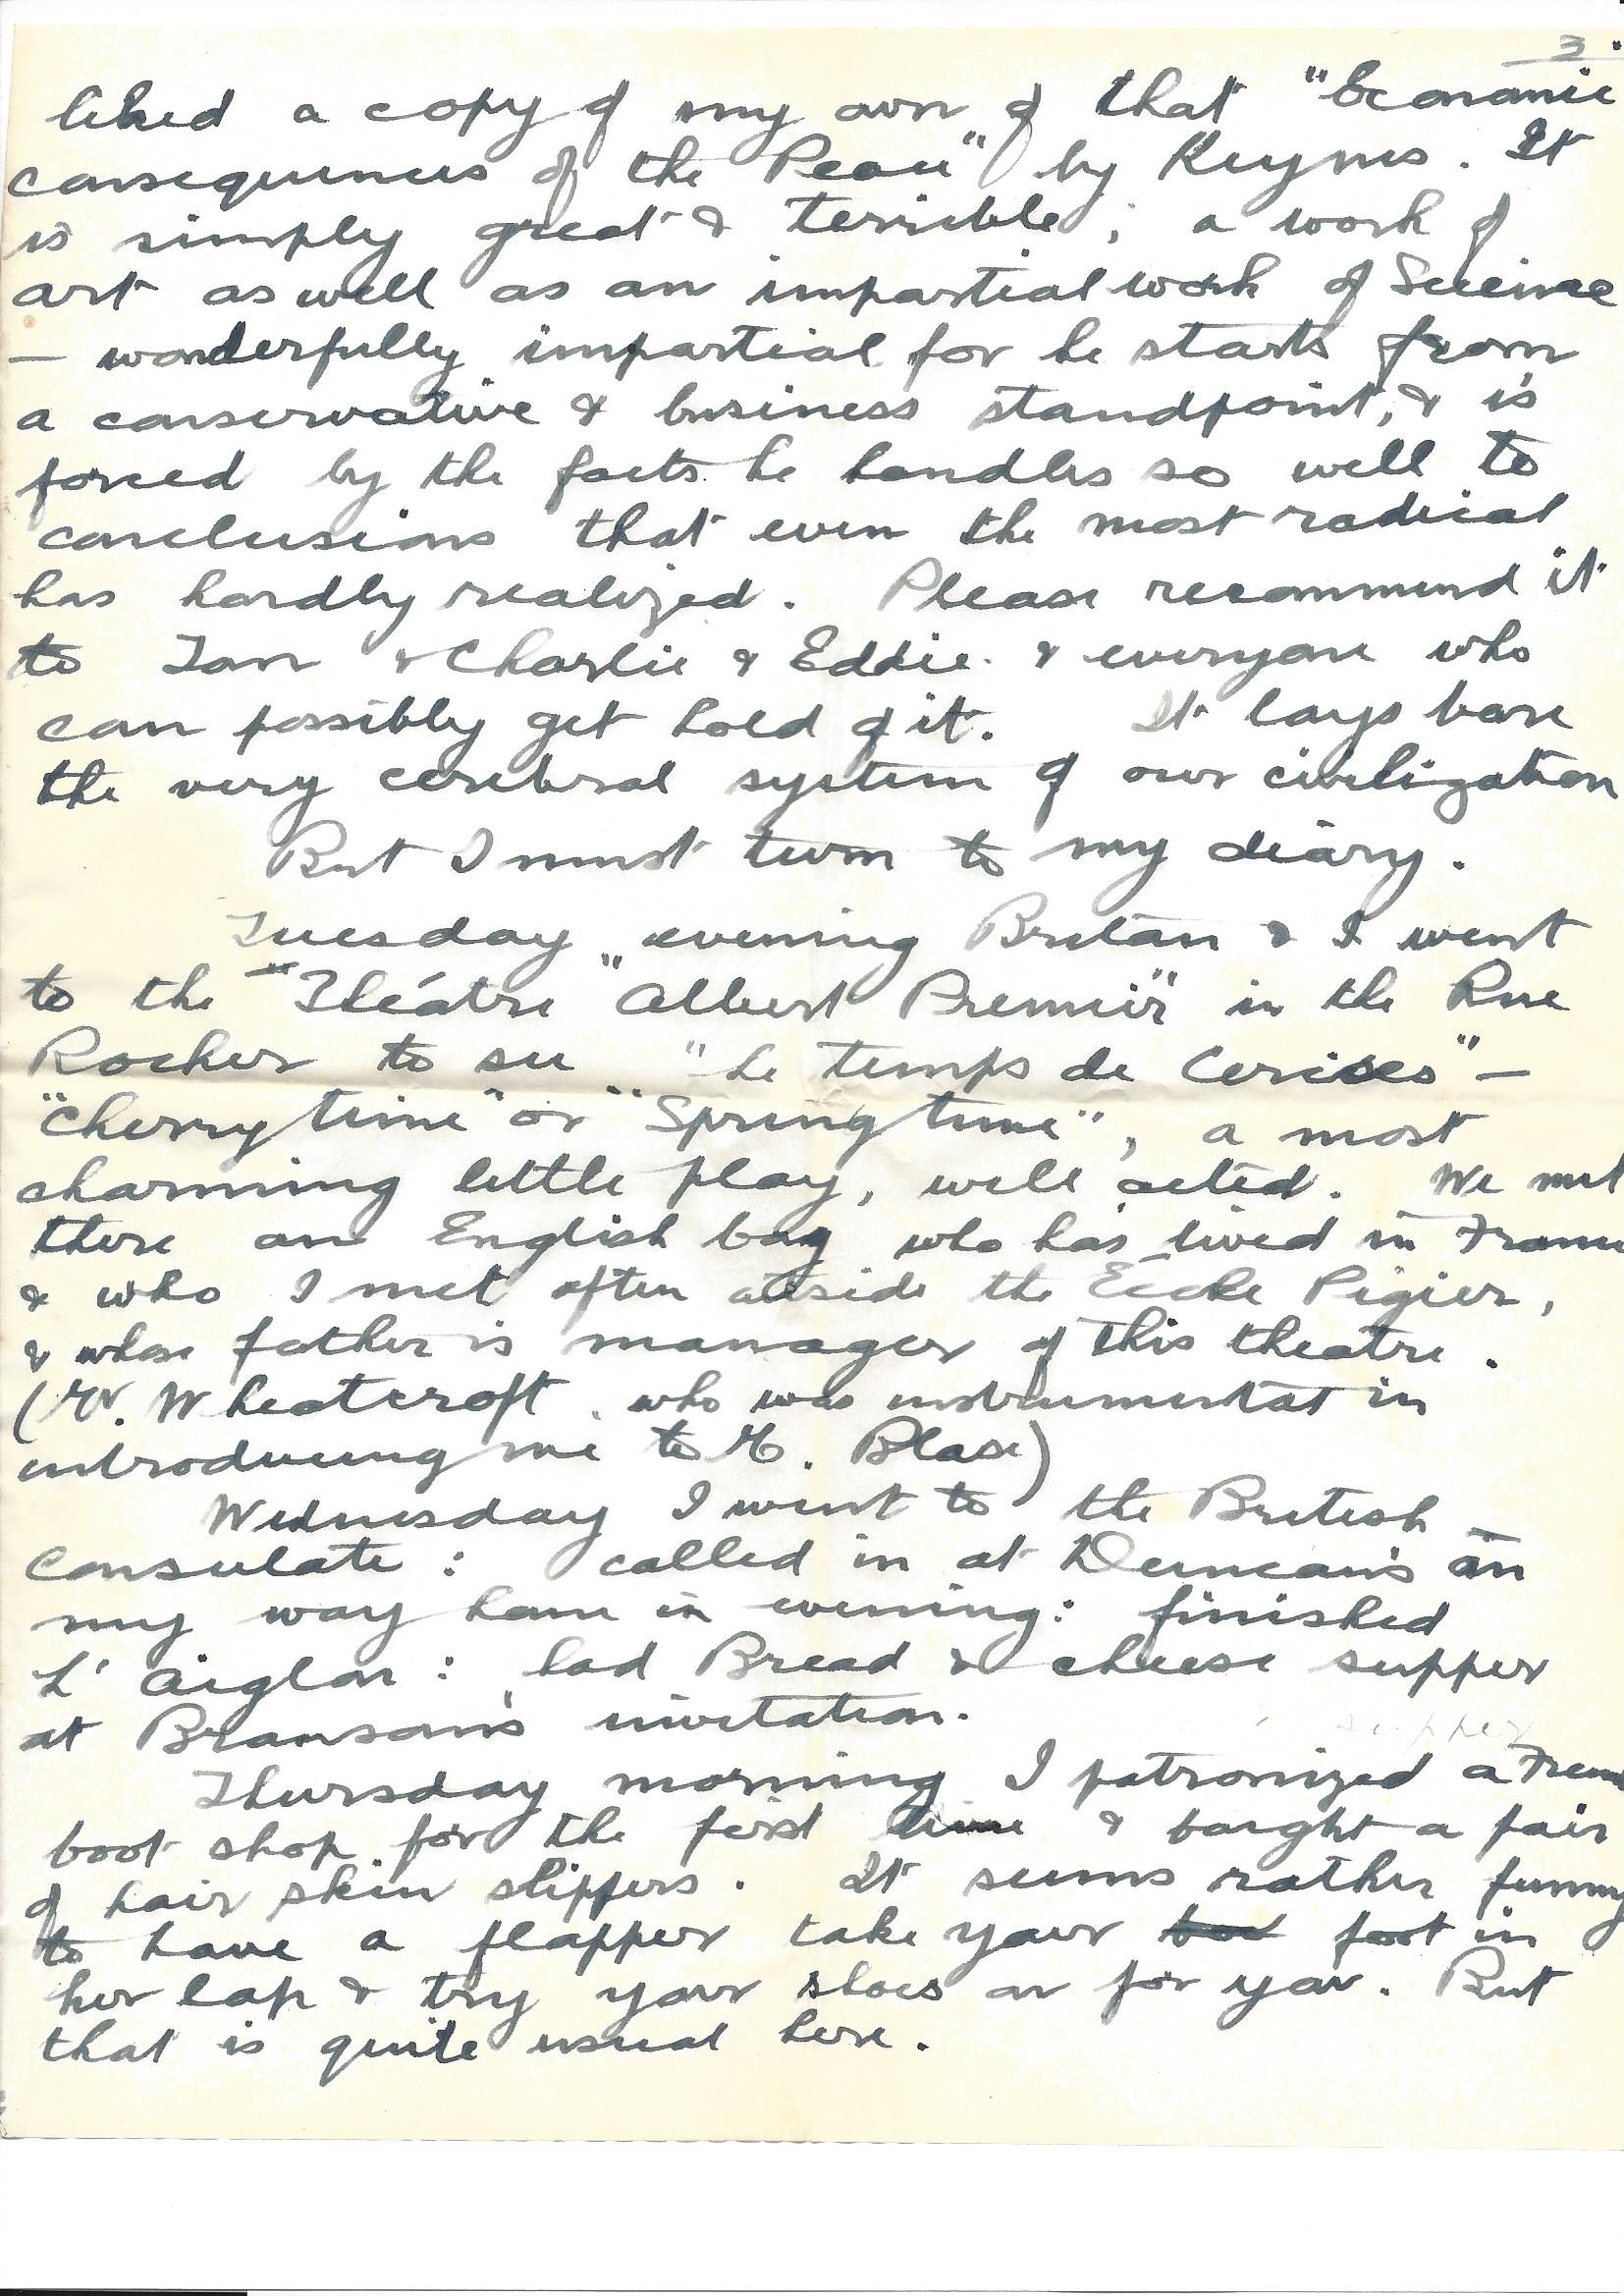 1920-01-18 page 4 letter by Donald Bearman